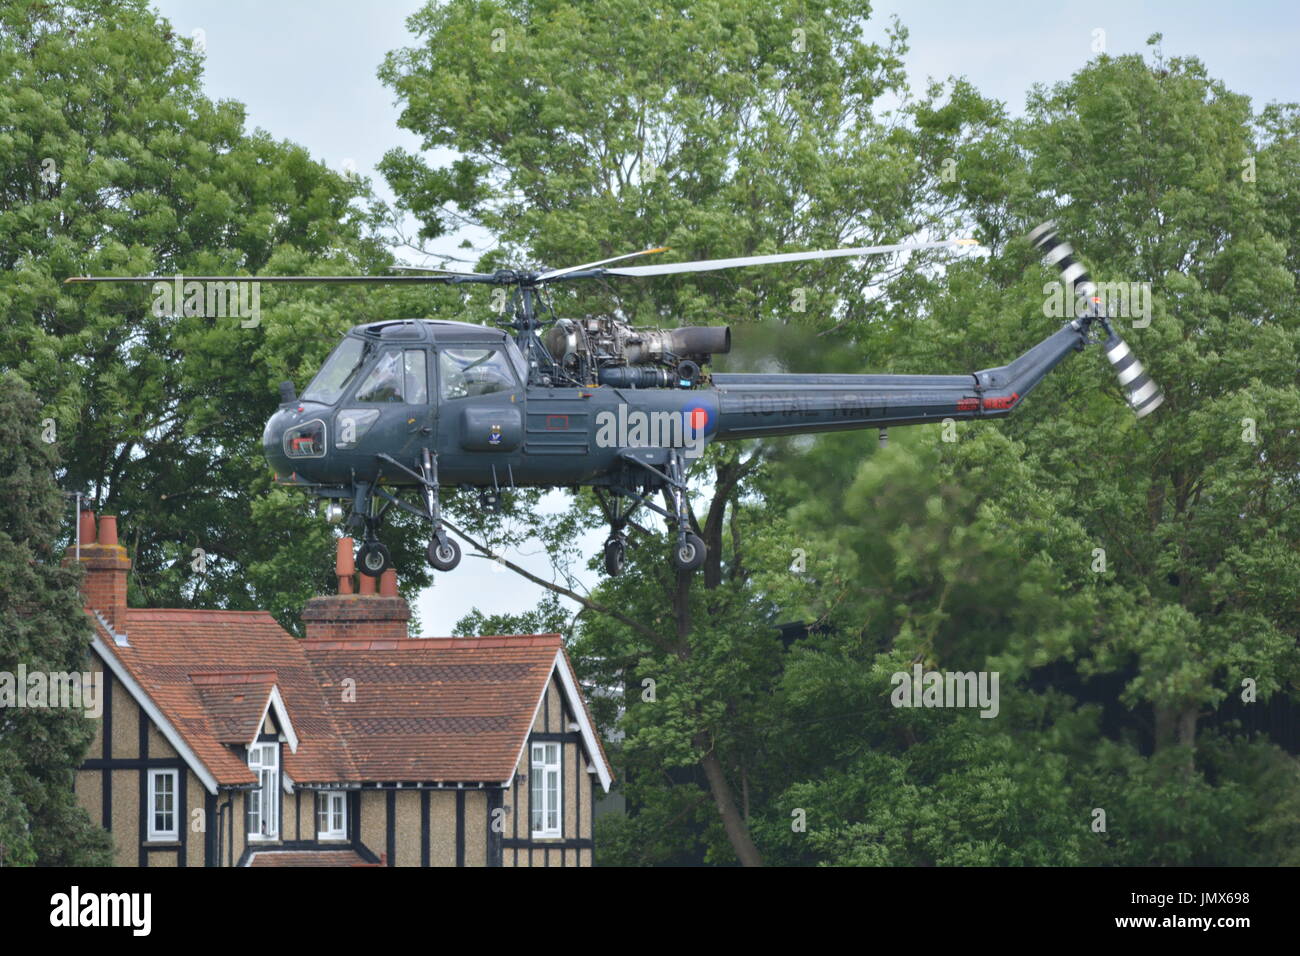 westland wasp navy helicopter at shuttleworth fly navy airshow Stock Photo